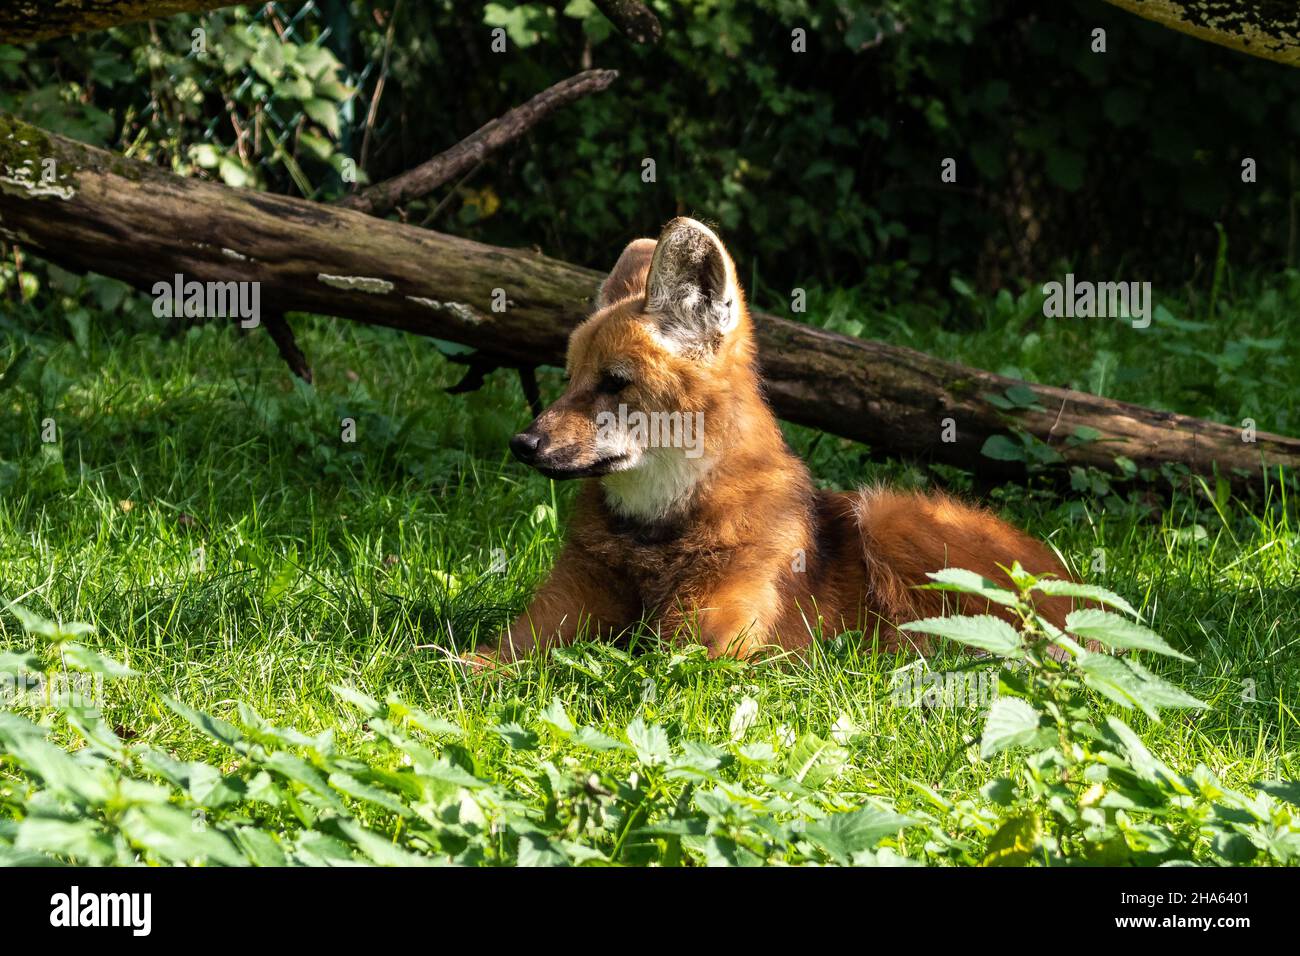 The Maned Wolf, Chrysocyon brachyurus is the largest canid of South America. This mammal lives in open and semi-open habitats, especially grasslands w Stock Photo